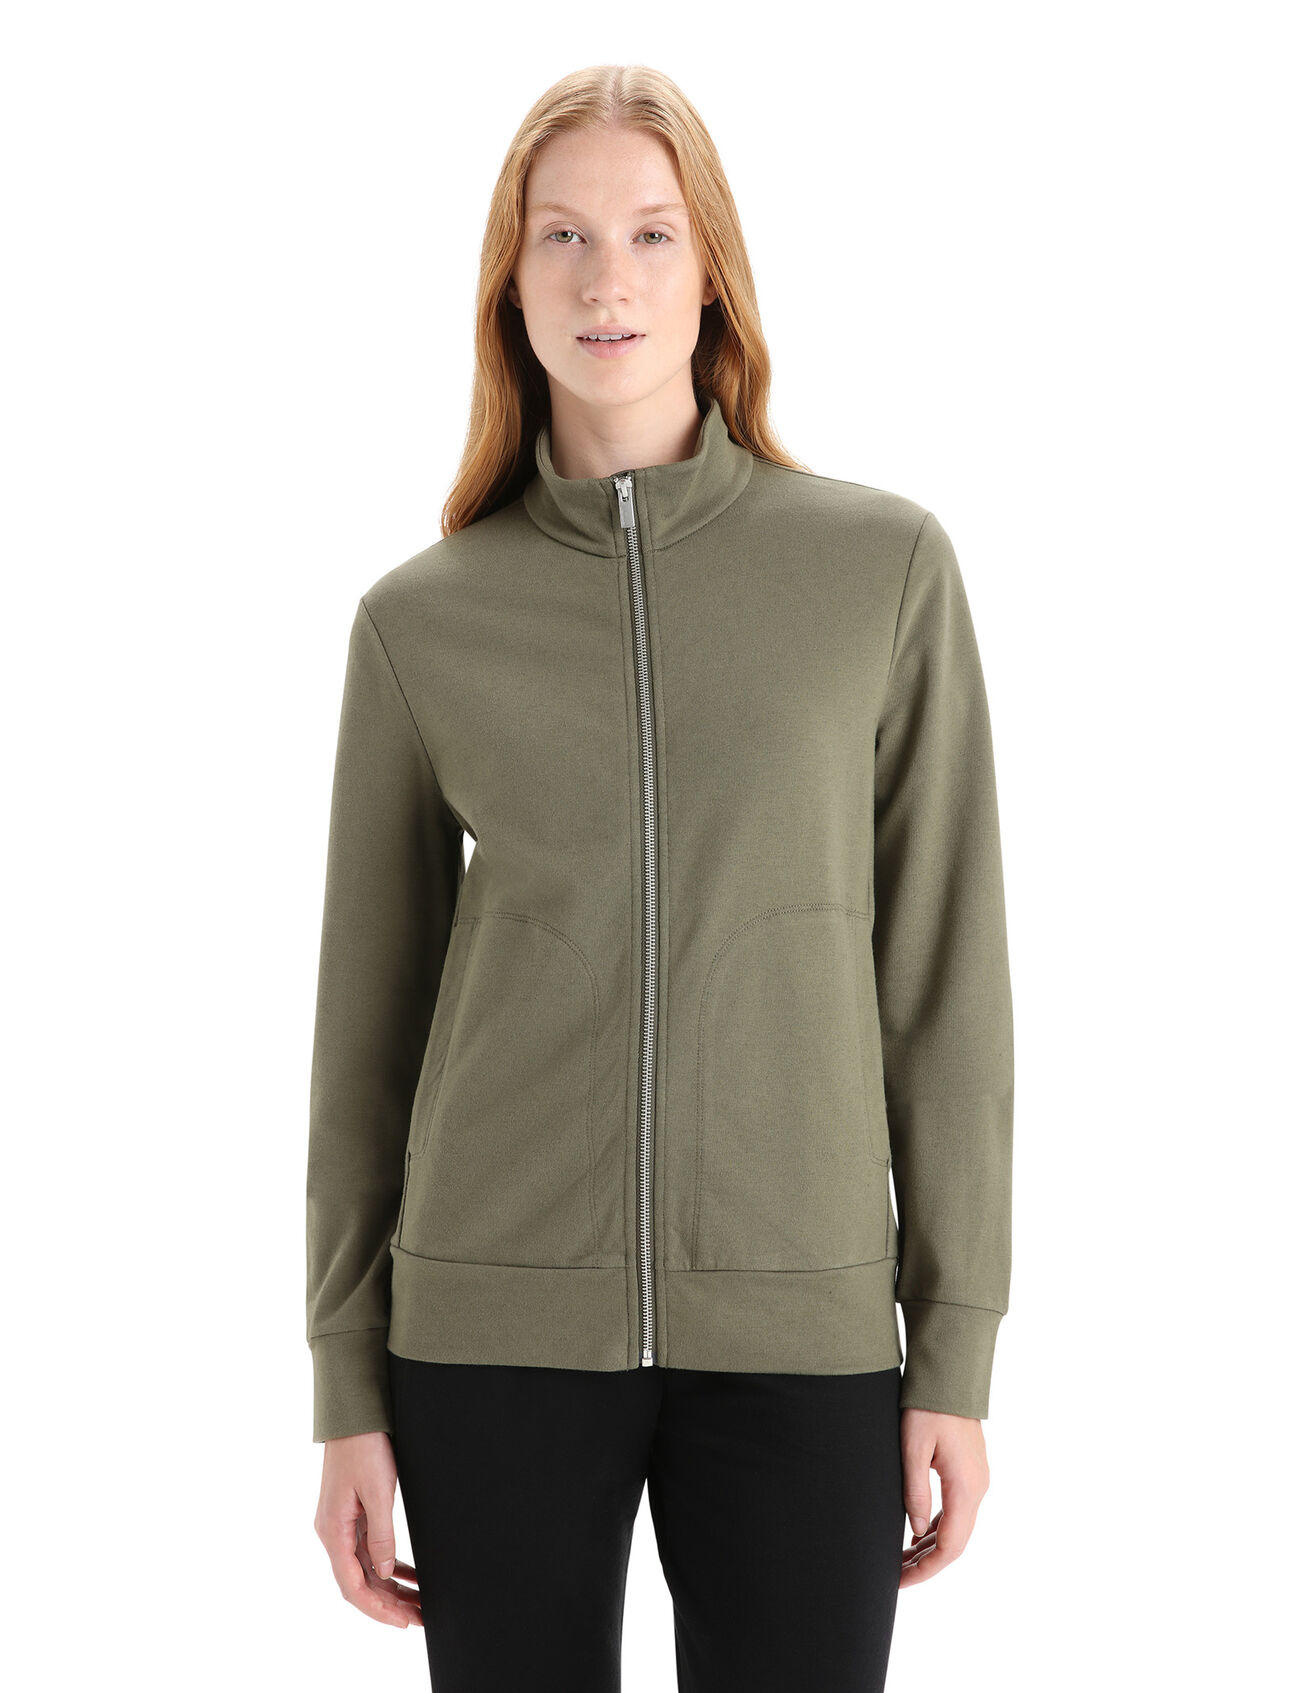 Womens Merino Blend Central Classic Long Sleeve Zip Sweatshirt A stylish, classic and comfortable everyday sweatshirt that blends natural merino wool with organically grown cotton, the Central Classic Long Sleeve Zip is an everyday staple that's breathable and incredibly versatile.  